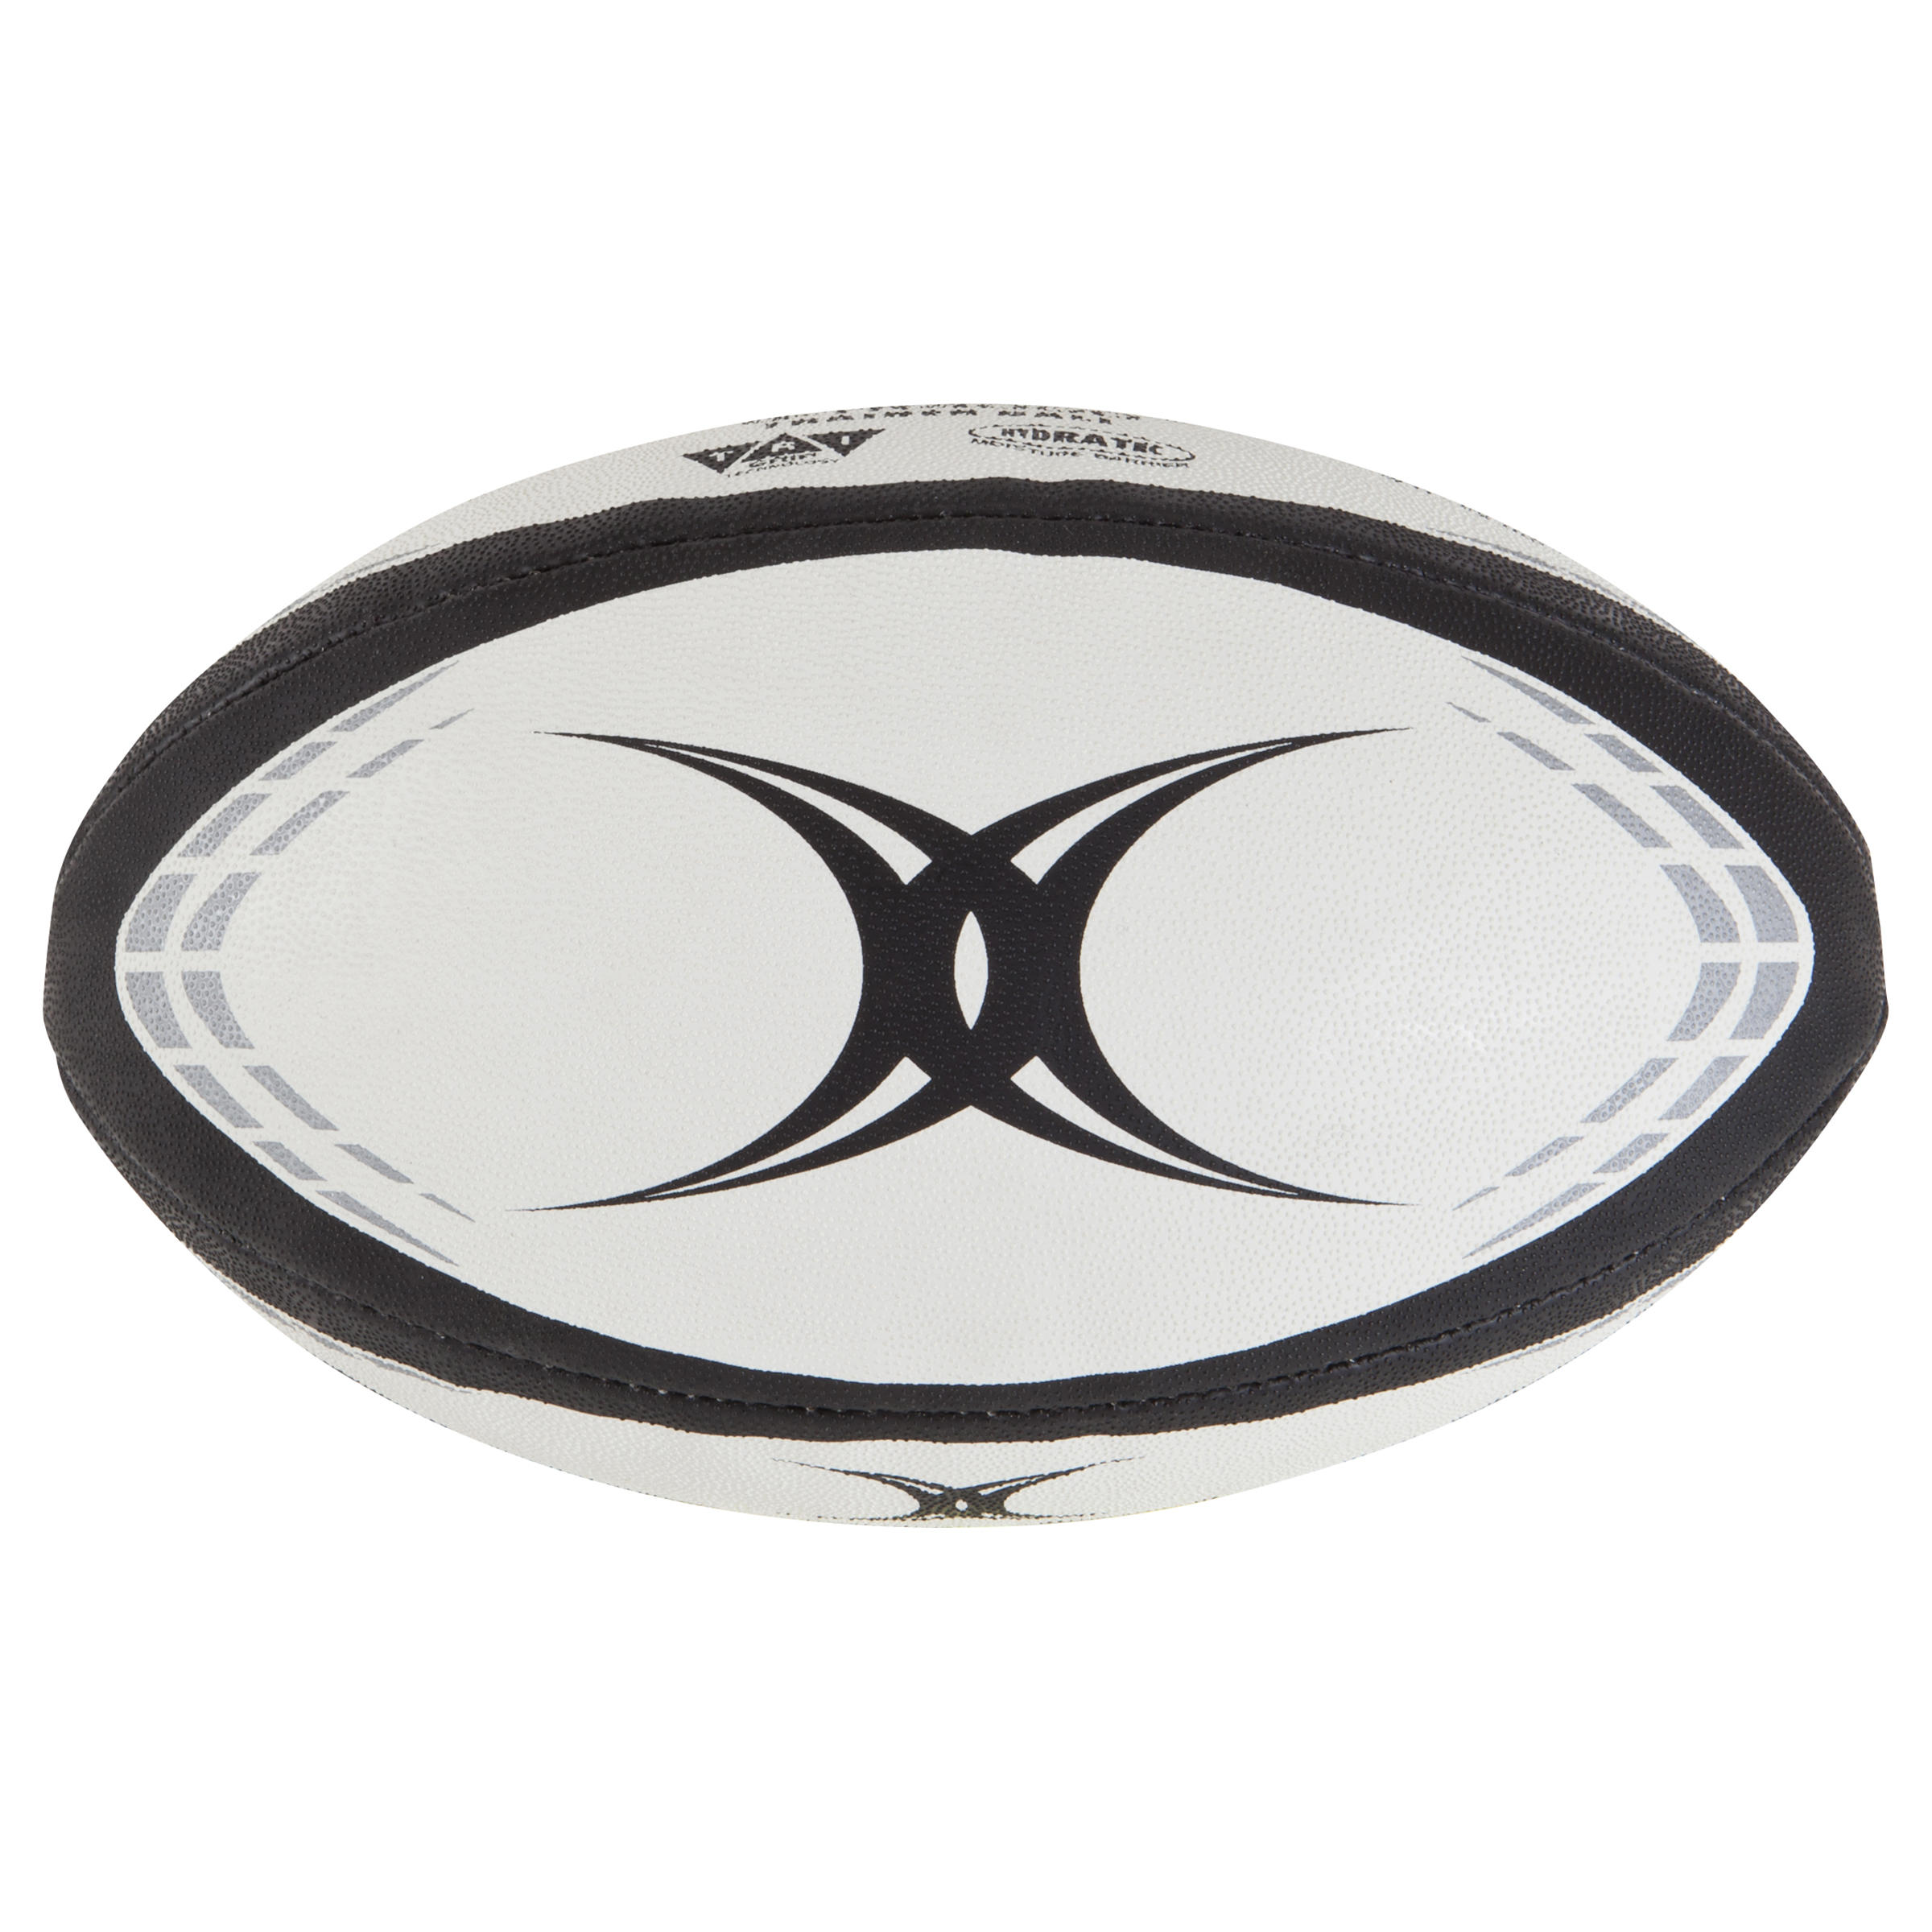 Rugby Ball Gtr4000 Size 5 - White/Black 2/9